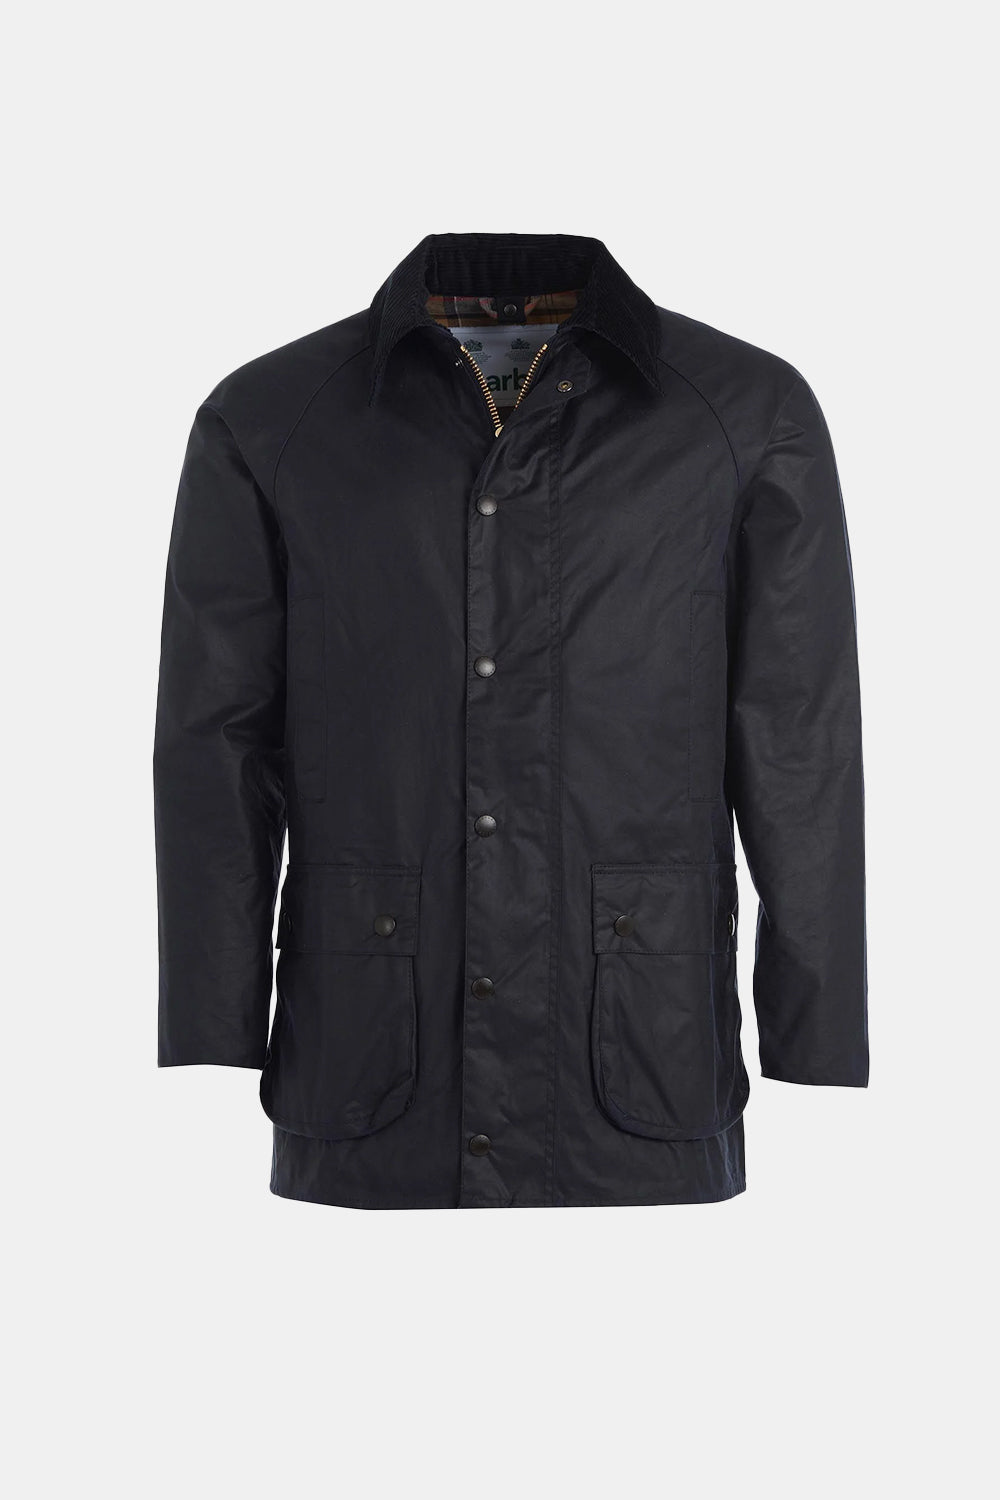 Barbour White Label SL Beaufort Waxed Cotton Jacket (Navy) | Number Six